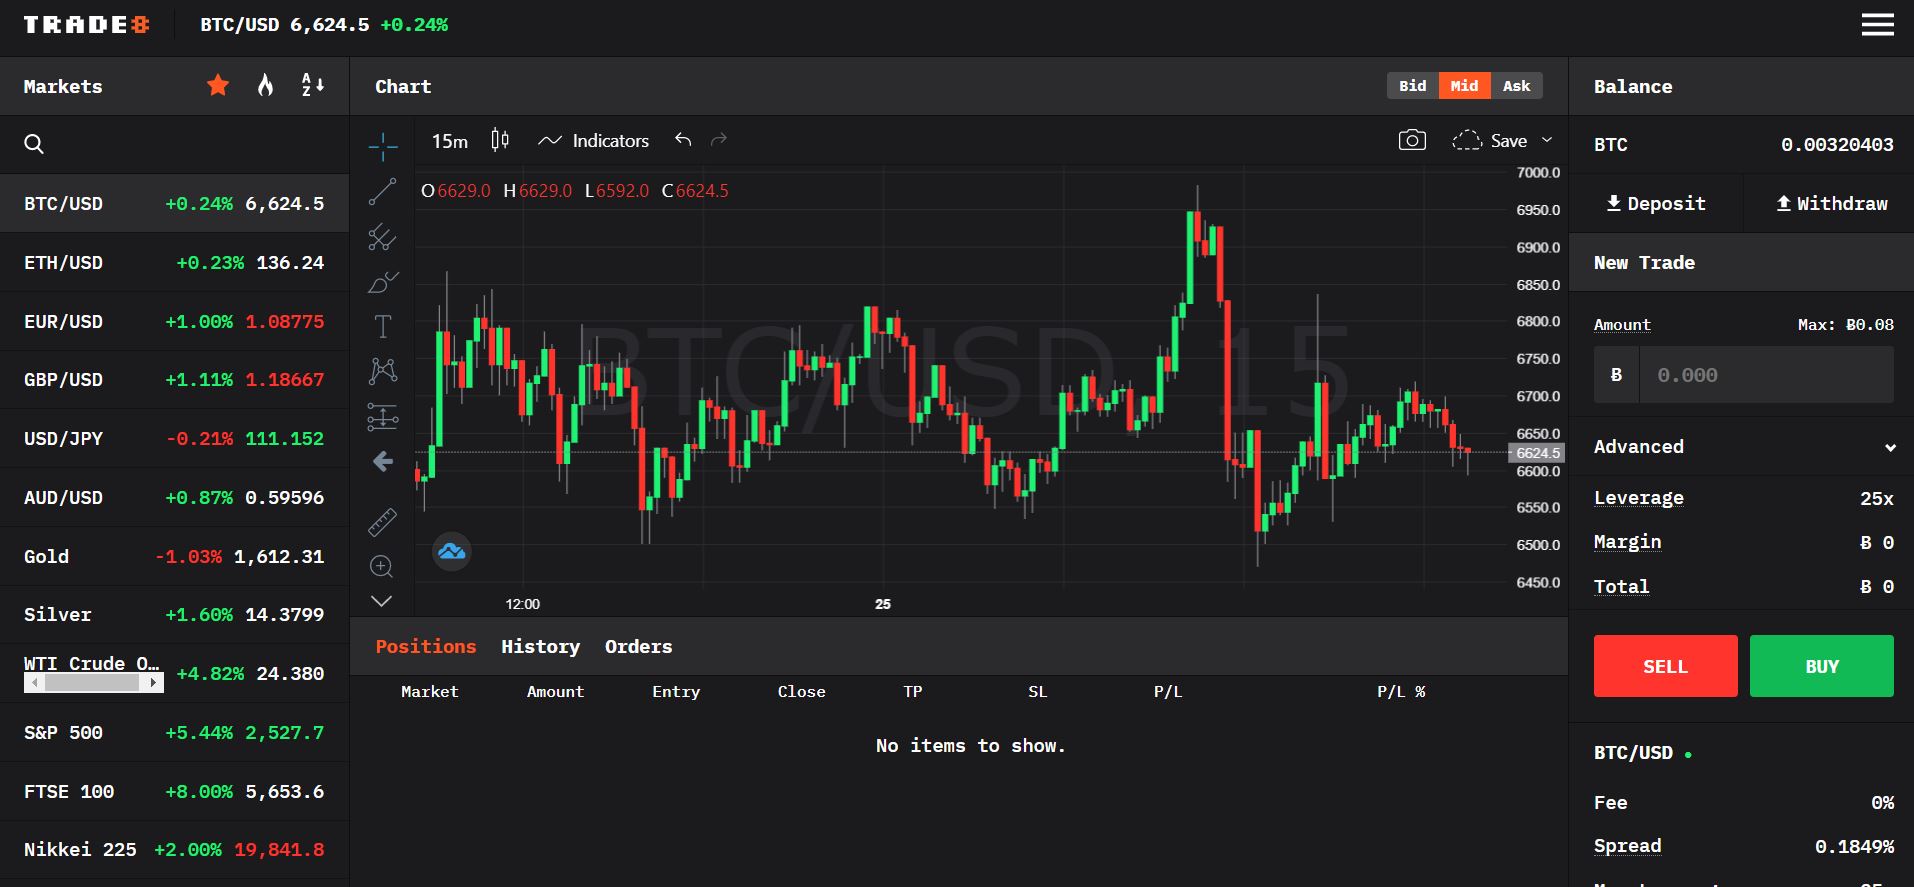 trade8 web trading platform forex cfd cryptocurrency